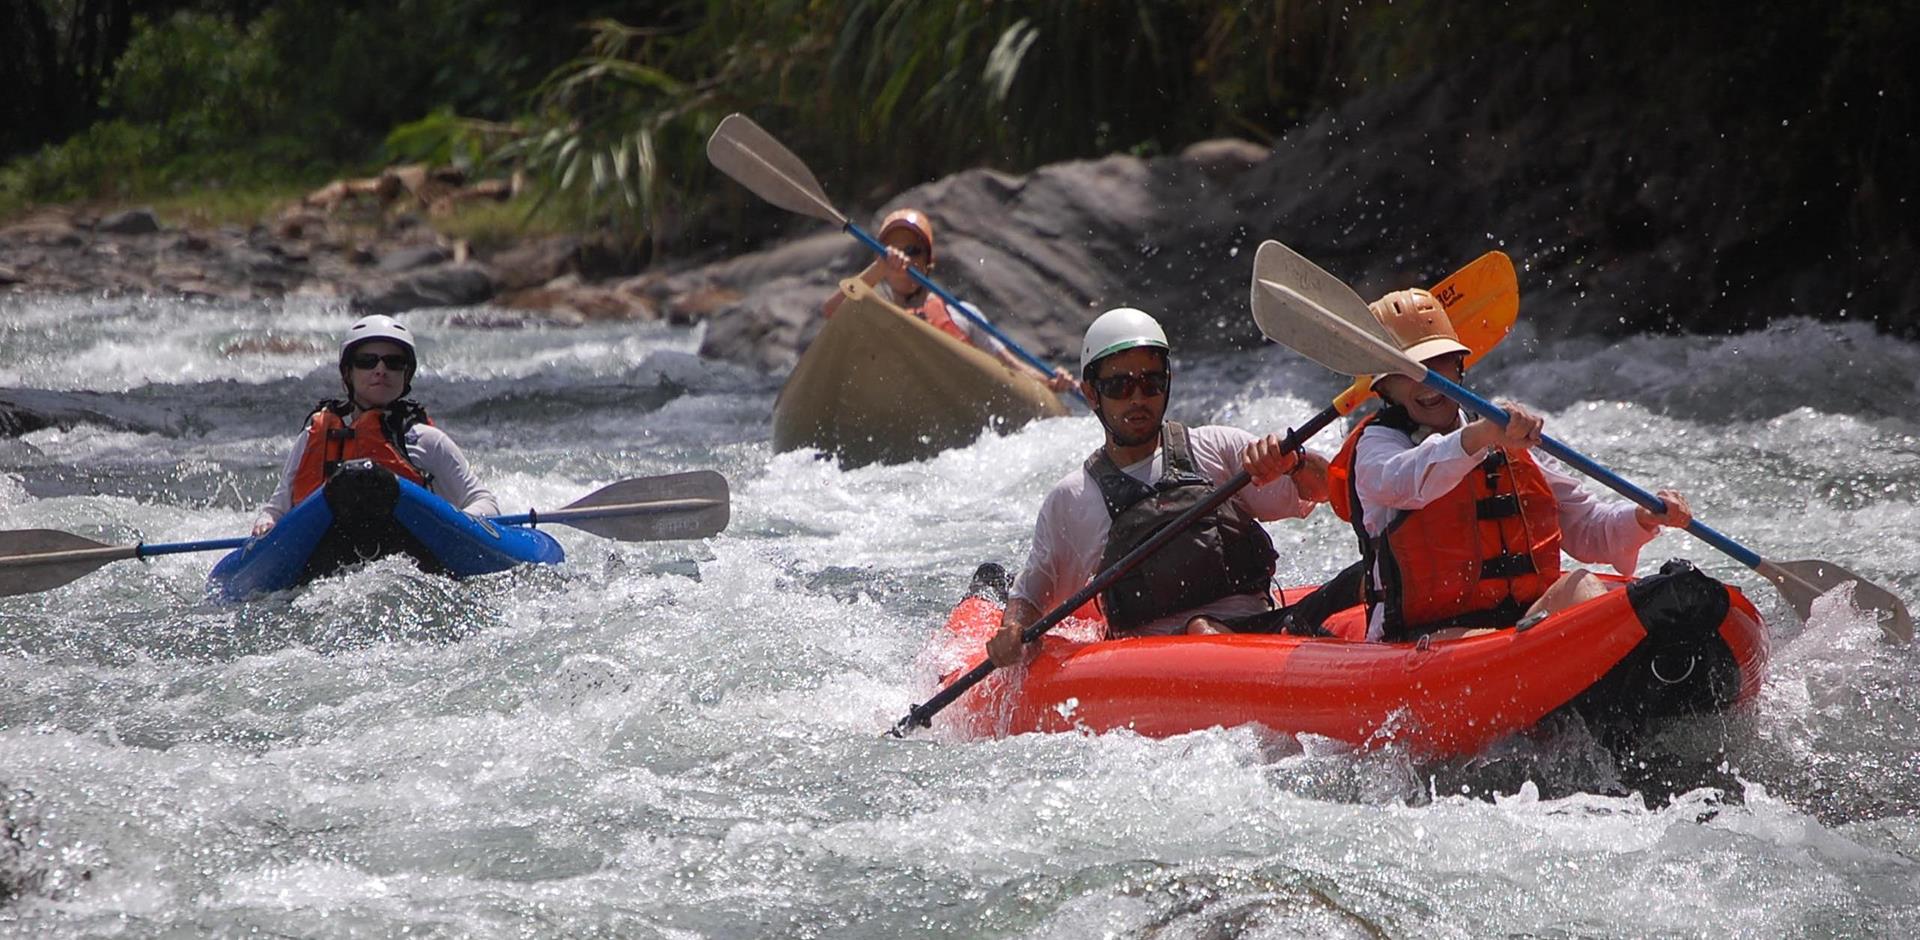 A&K Costa Rica experience: Whitewater rafting class